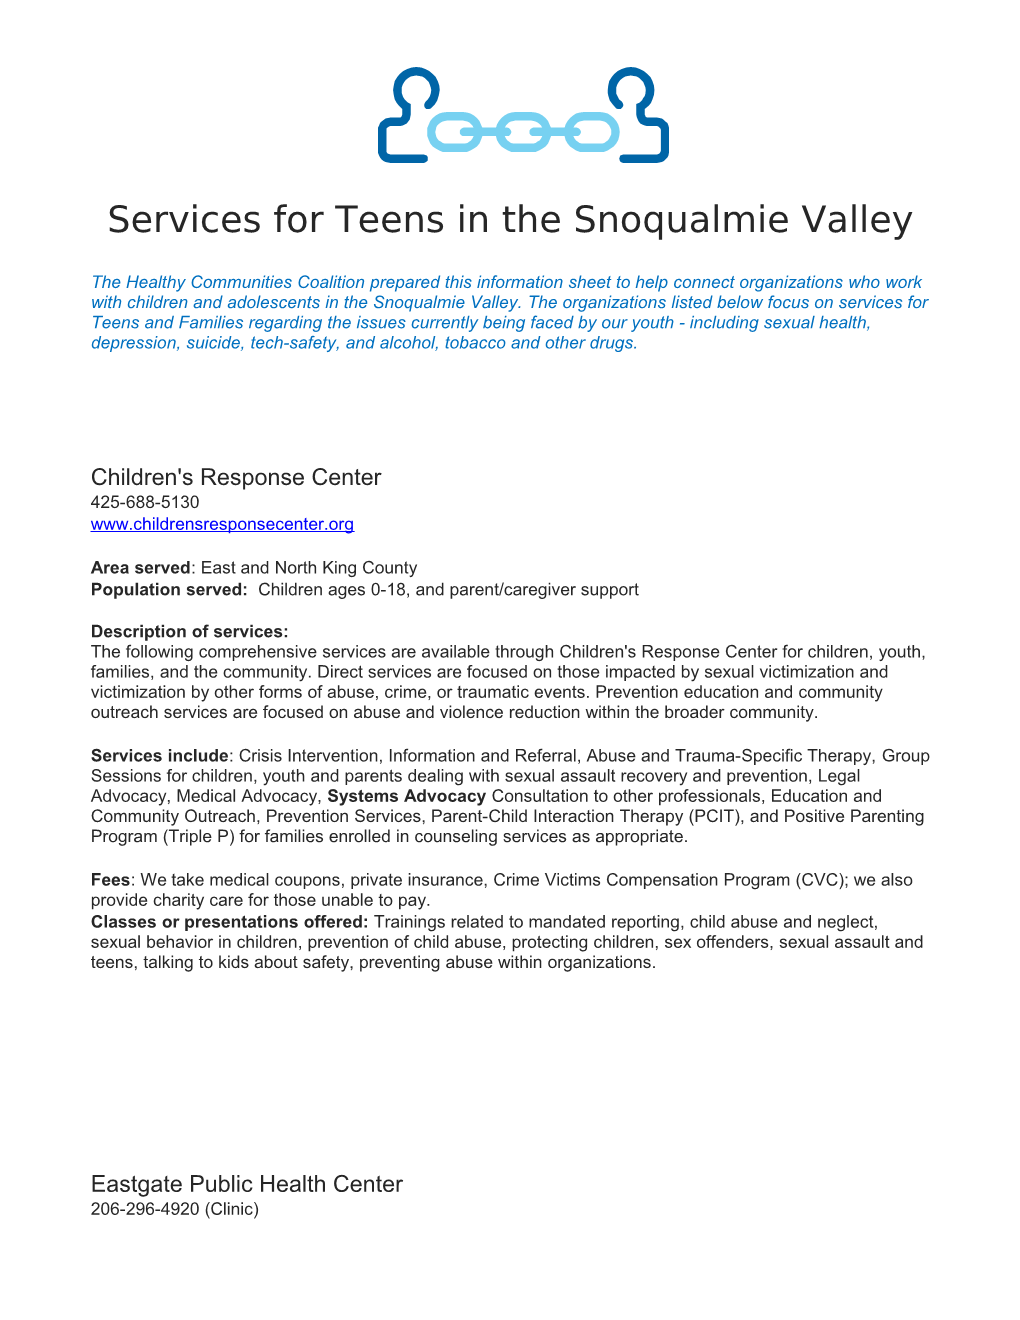 Services for Teens in the Snoqualmie Valley